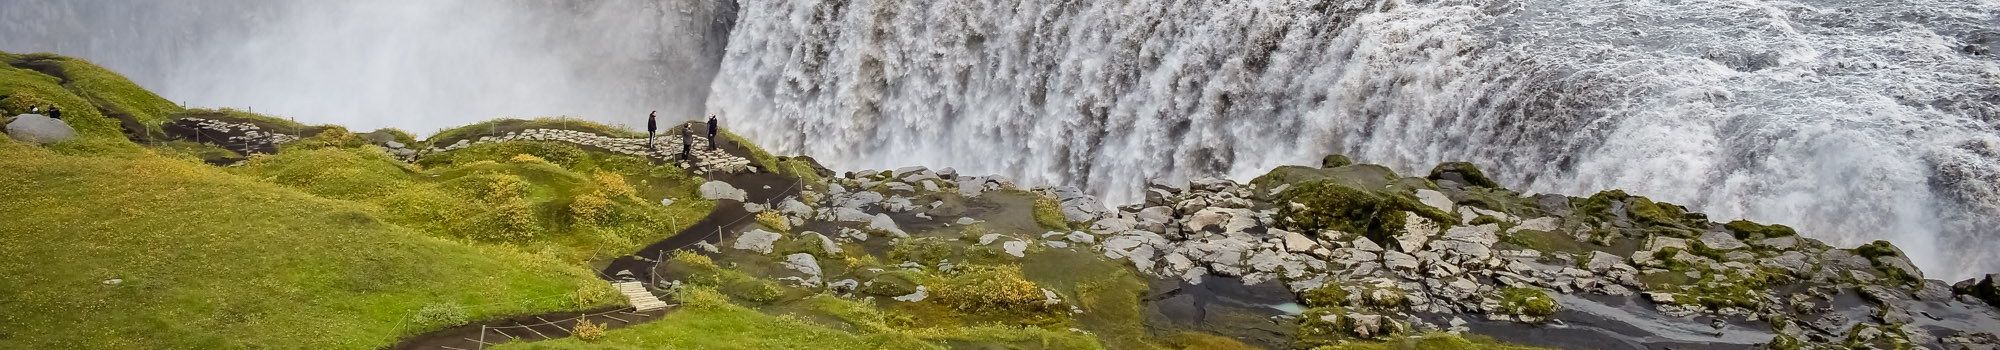 Dettifoss-Waterfall-North-Iceland